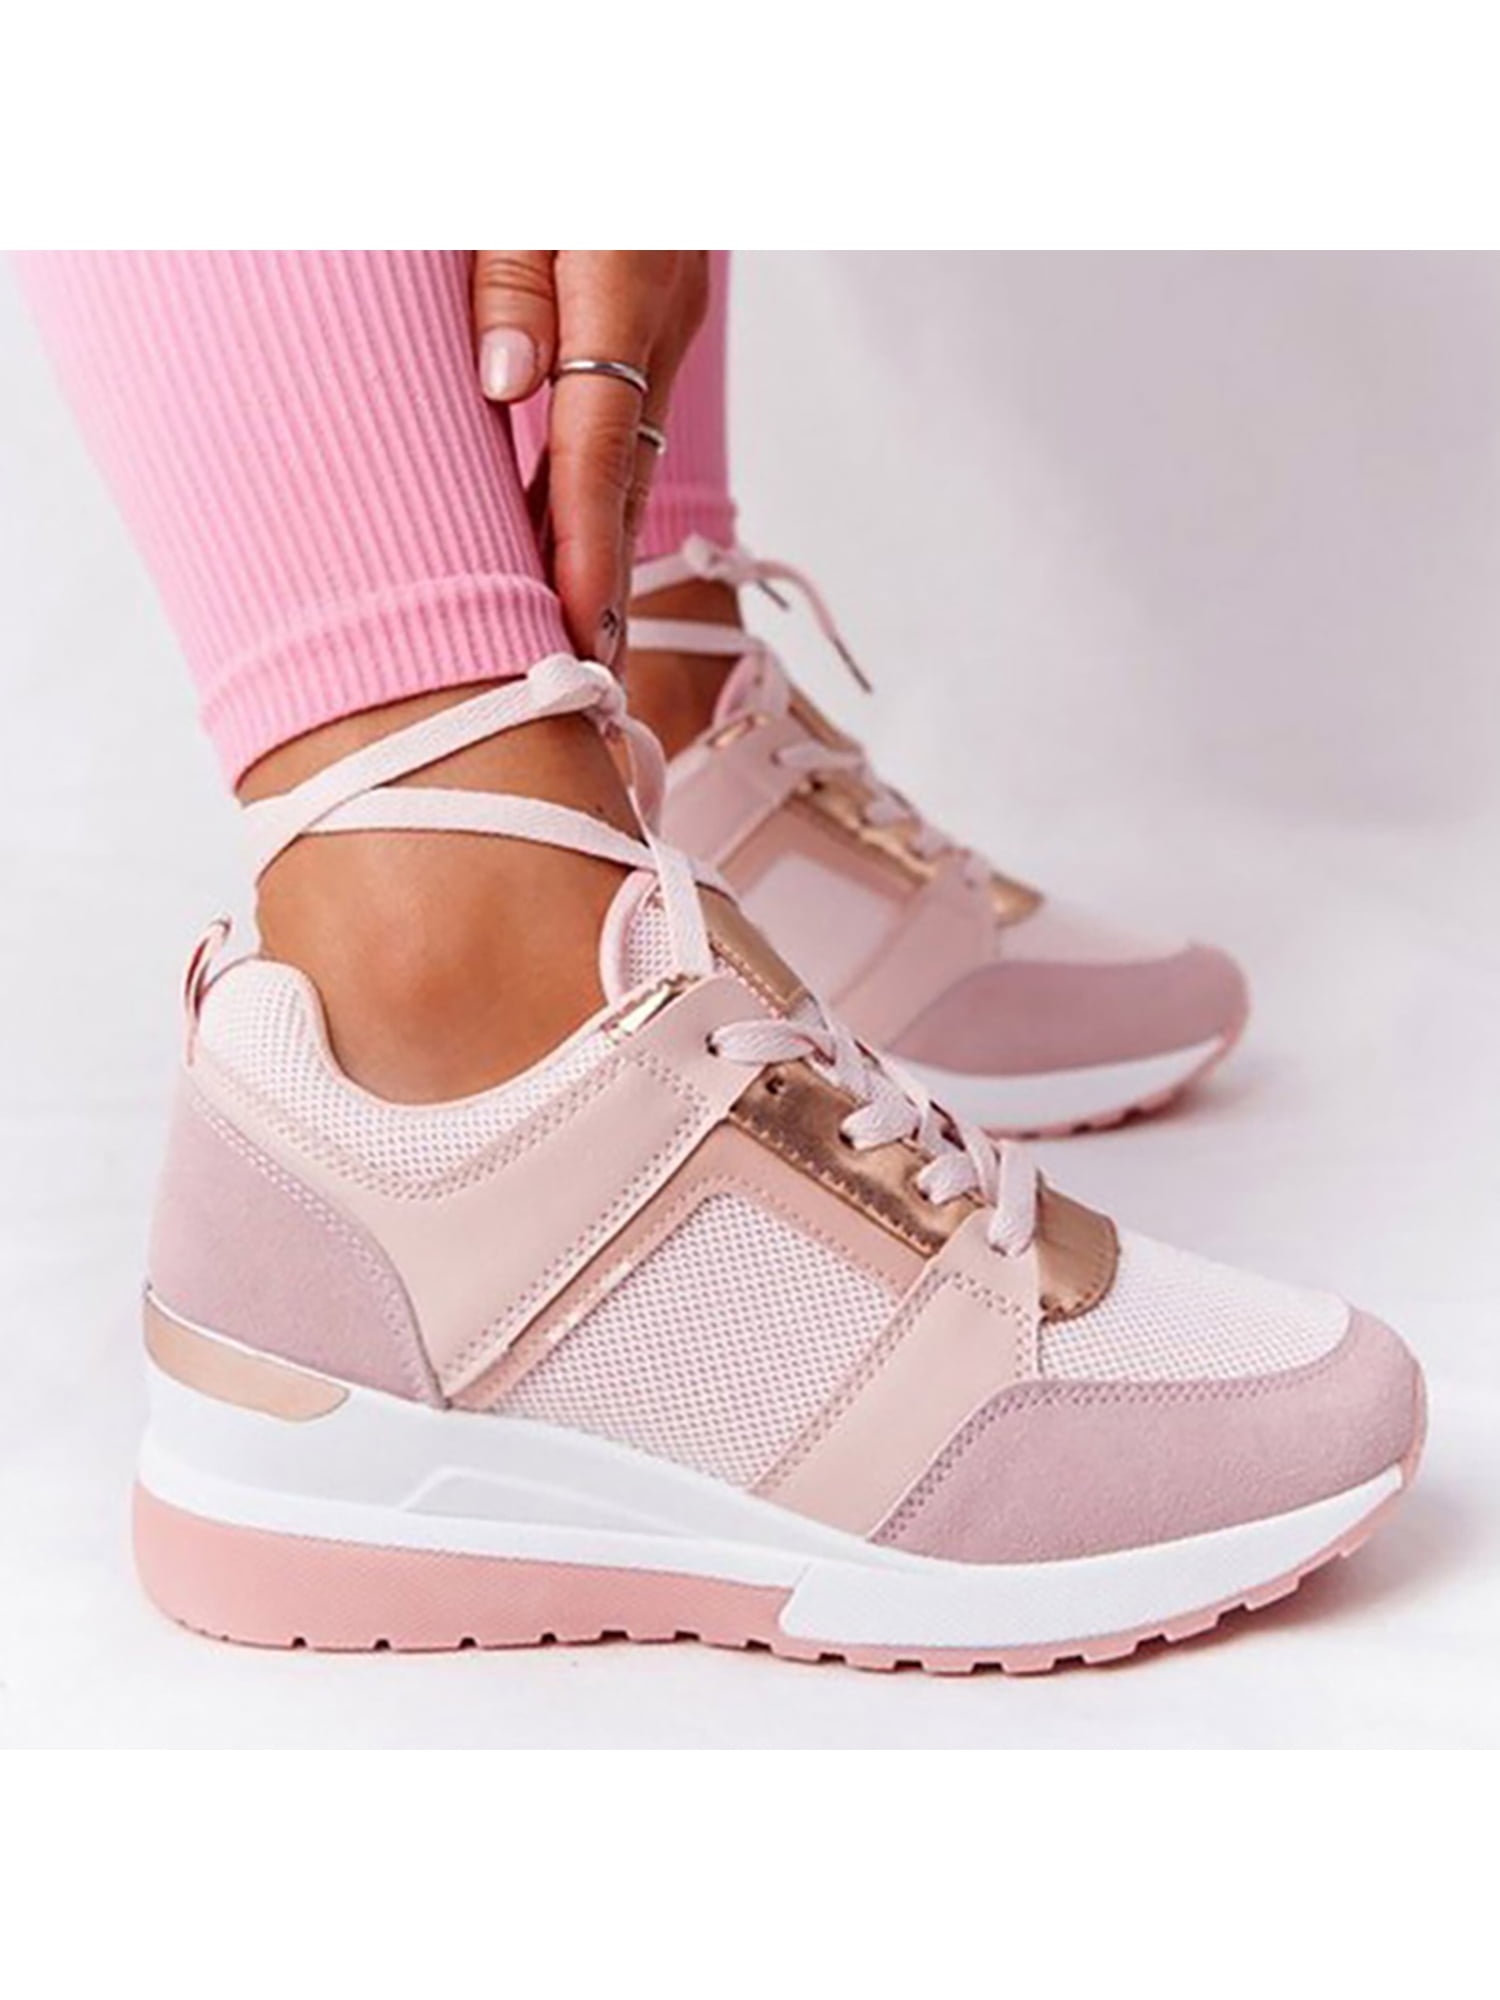 Midress Womens Fashion Casual Platform Wedges Tennis Walking Sneakers Air Sneakers Thick Bottom Shake Shoes High Heel Fitness Shoes 